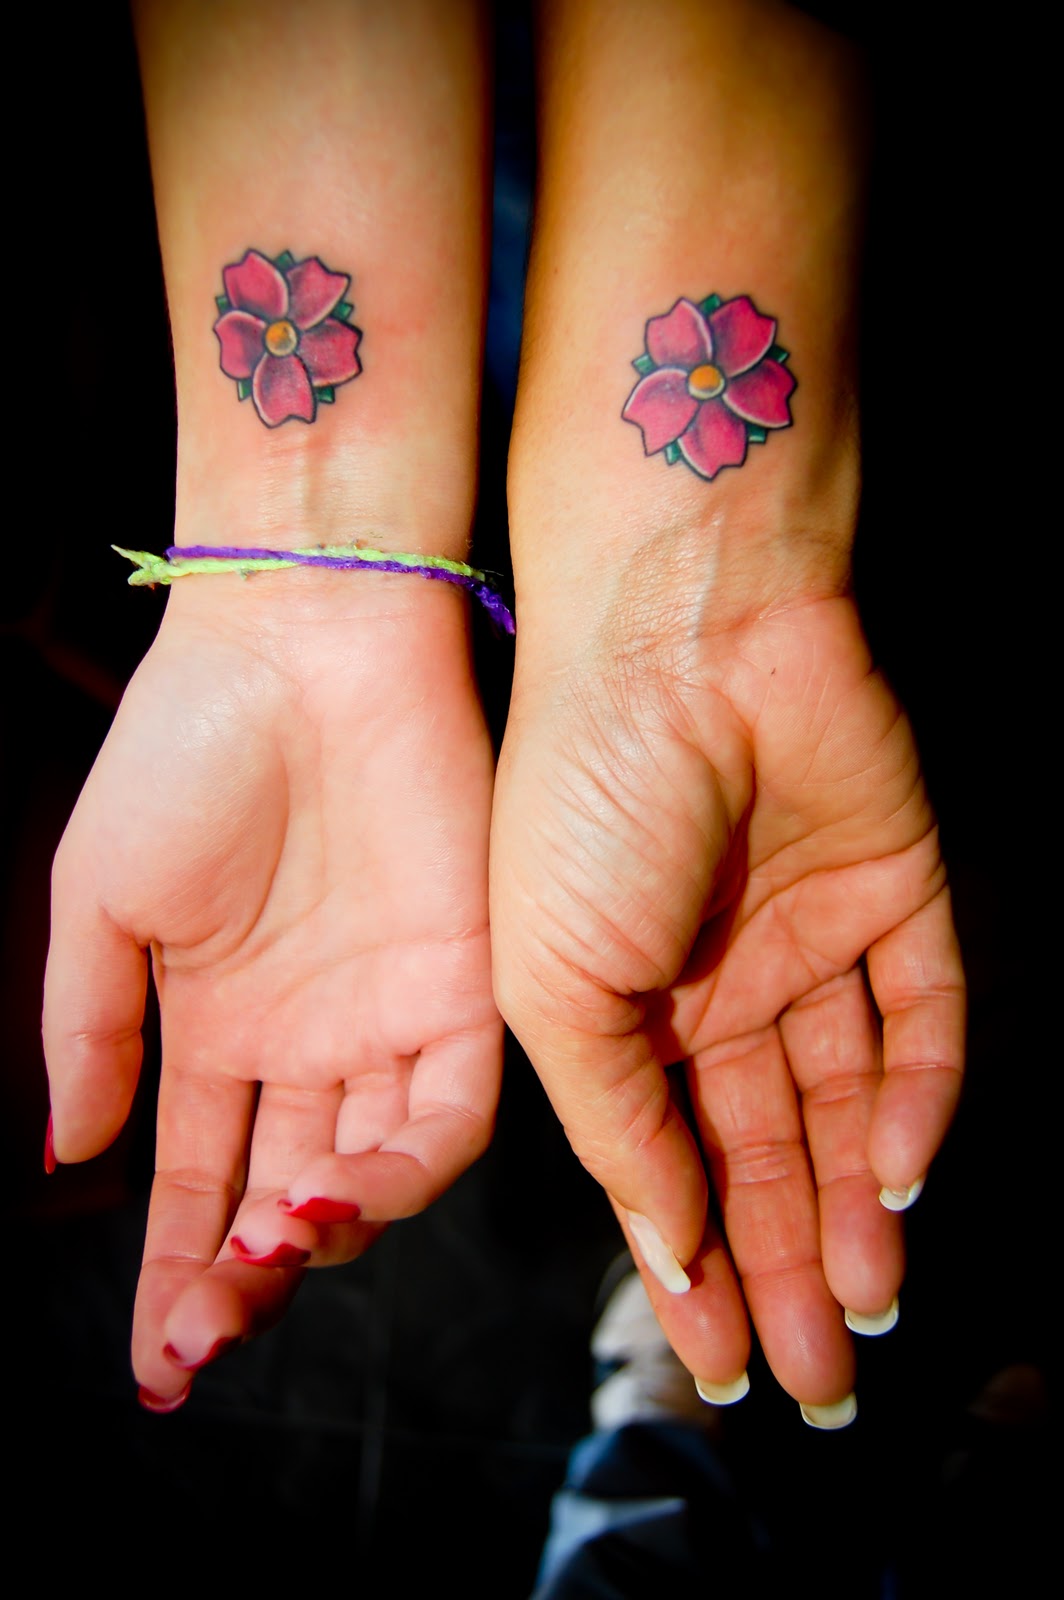 Friendship tattoos: best tattoo ideas for you and your bff - Legit.ng